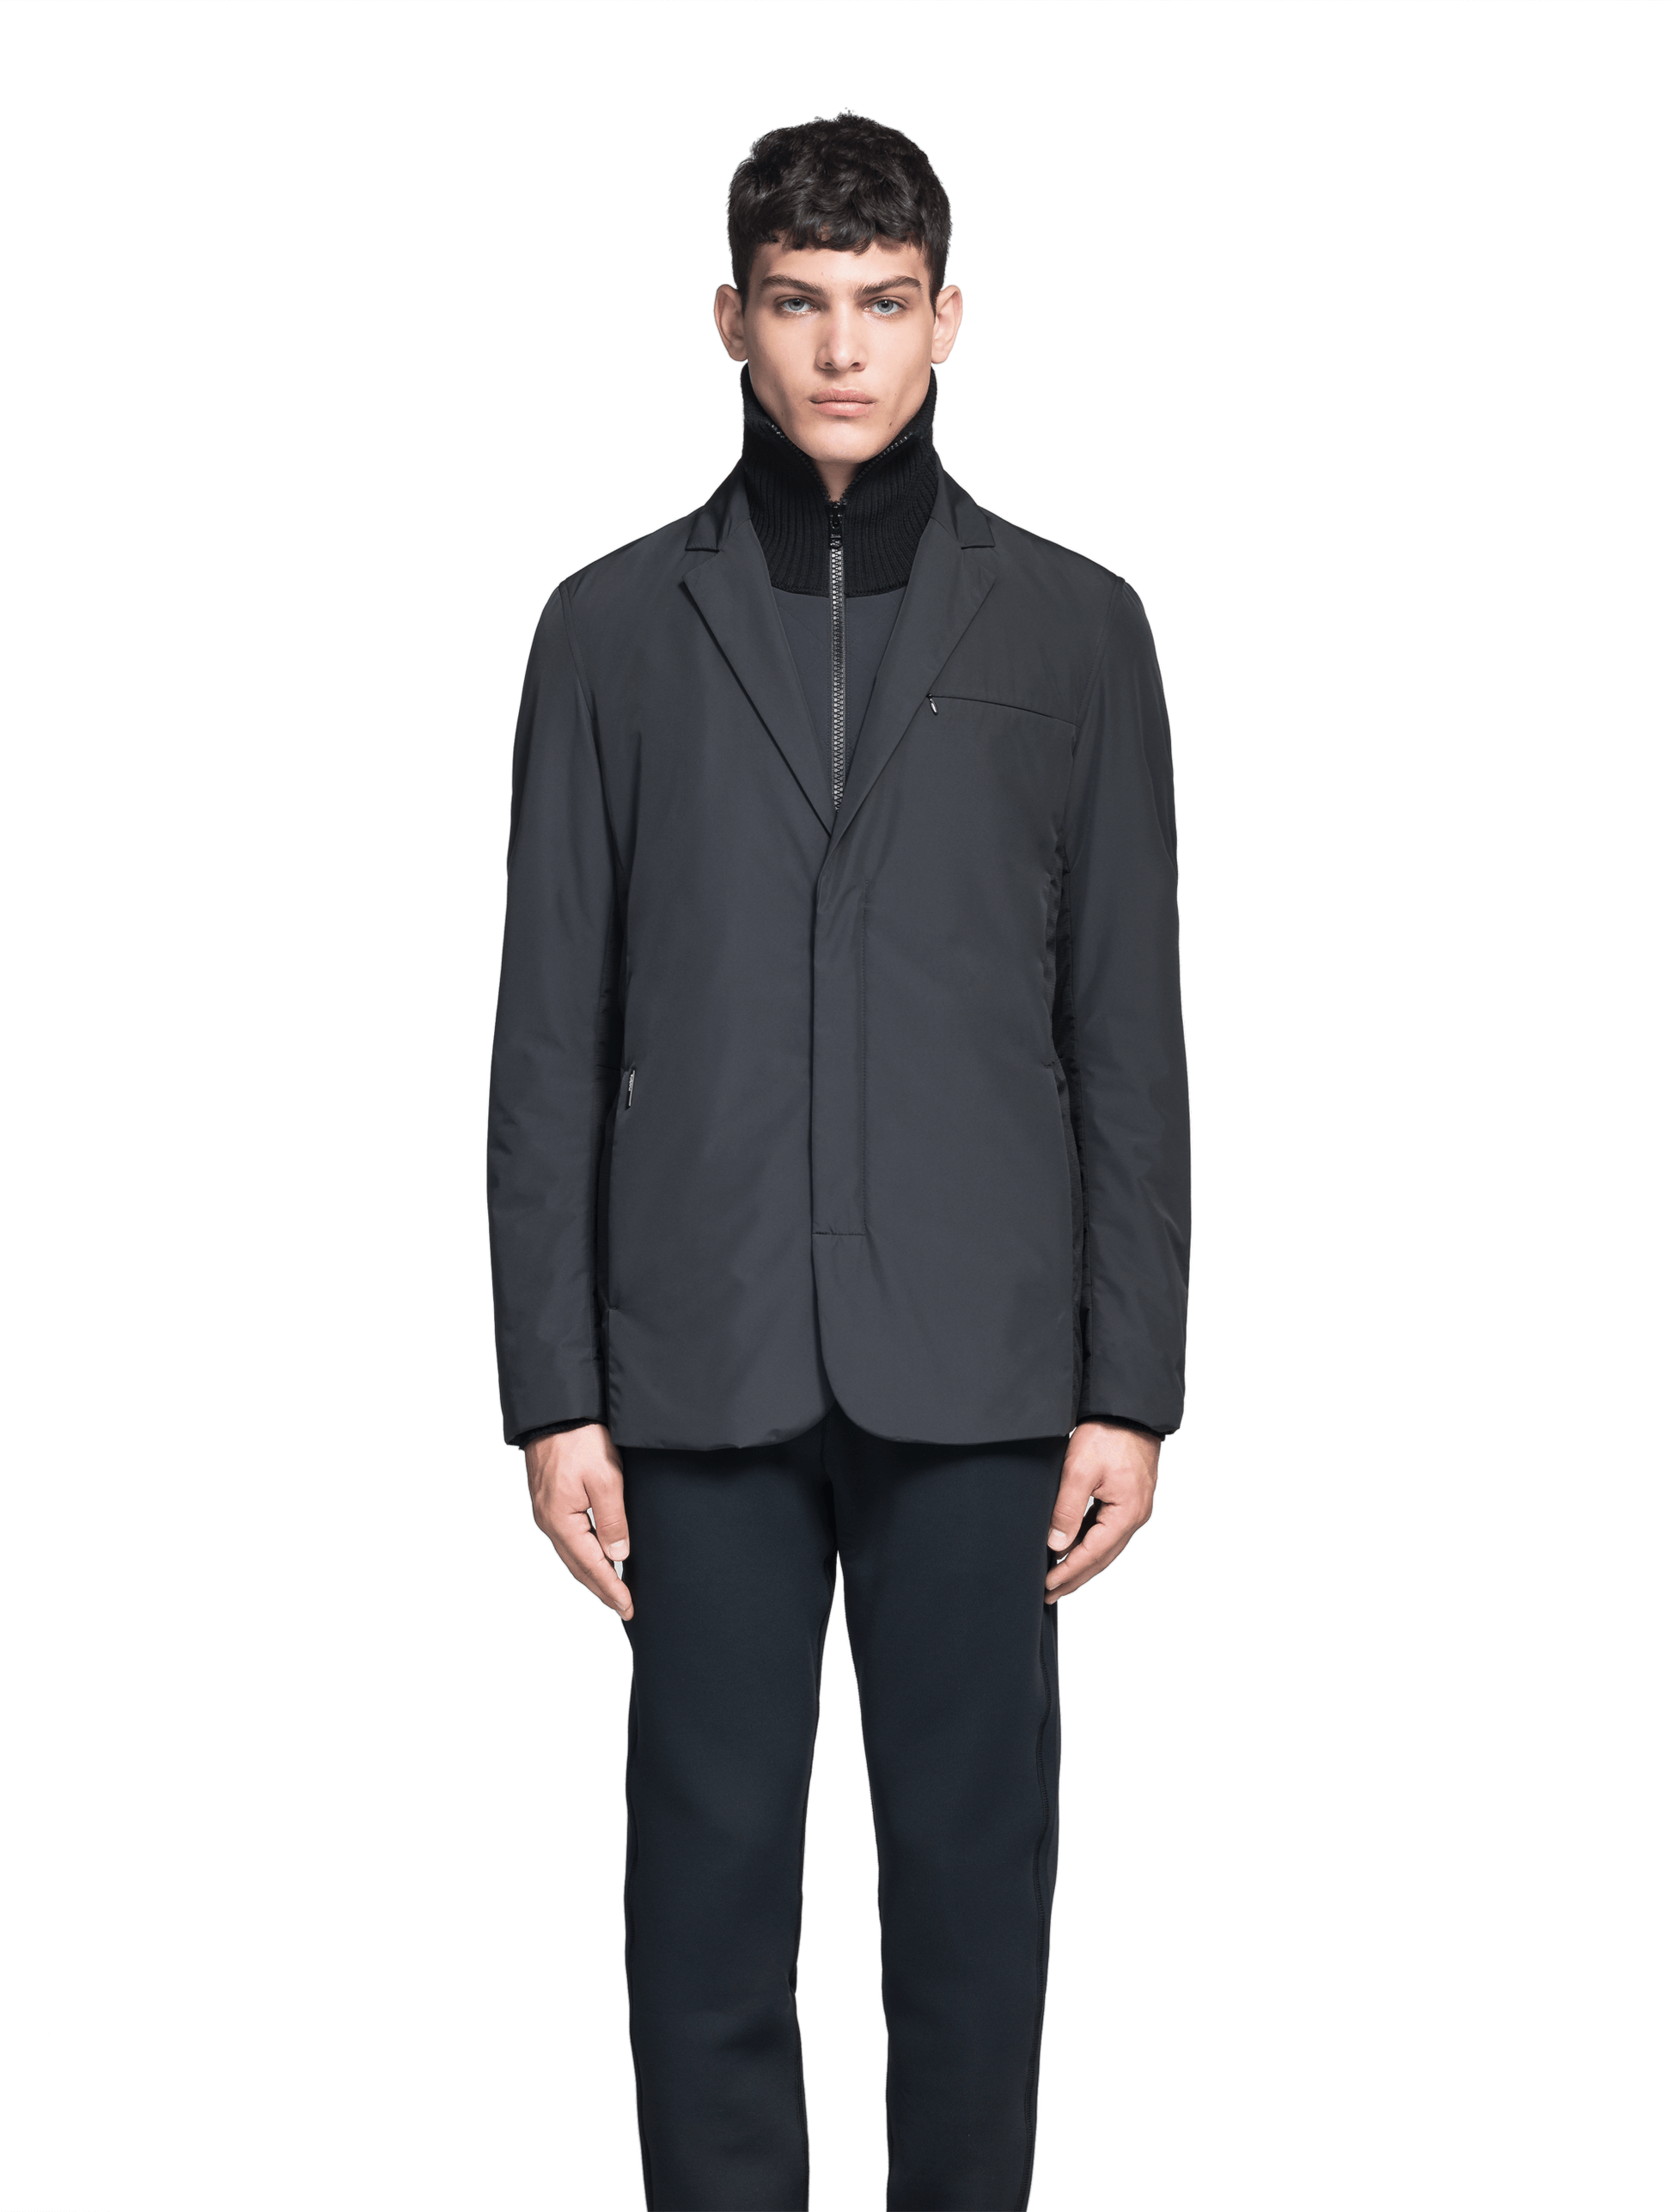 Cody Men's Tailored Travel Blazer in 3-ply micro denier and stretch nylon fabrication with DWR coating, Primaloft Gold Insulation Active+, hidden two-way zipper at centre front with snap closure placket, three invisible exterior zipper pockets, double back pleats, and hidden snap placket at cuffs, in Black